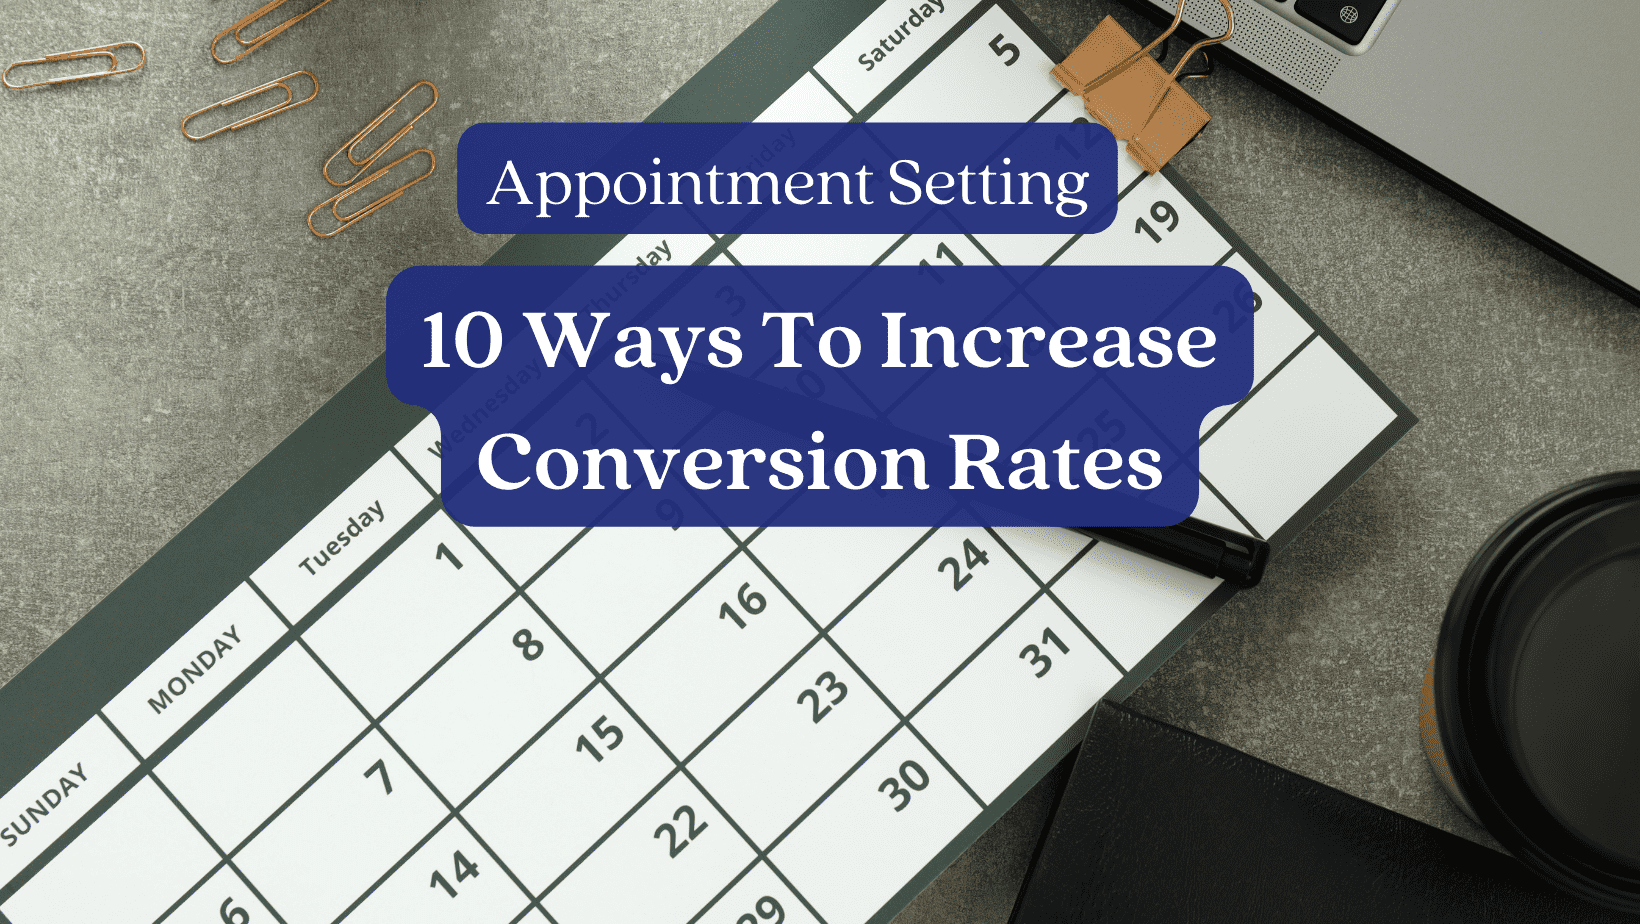 Appointment Setting: 10 Ways to Increase Conversion Rates